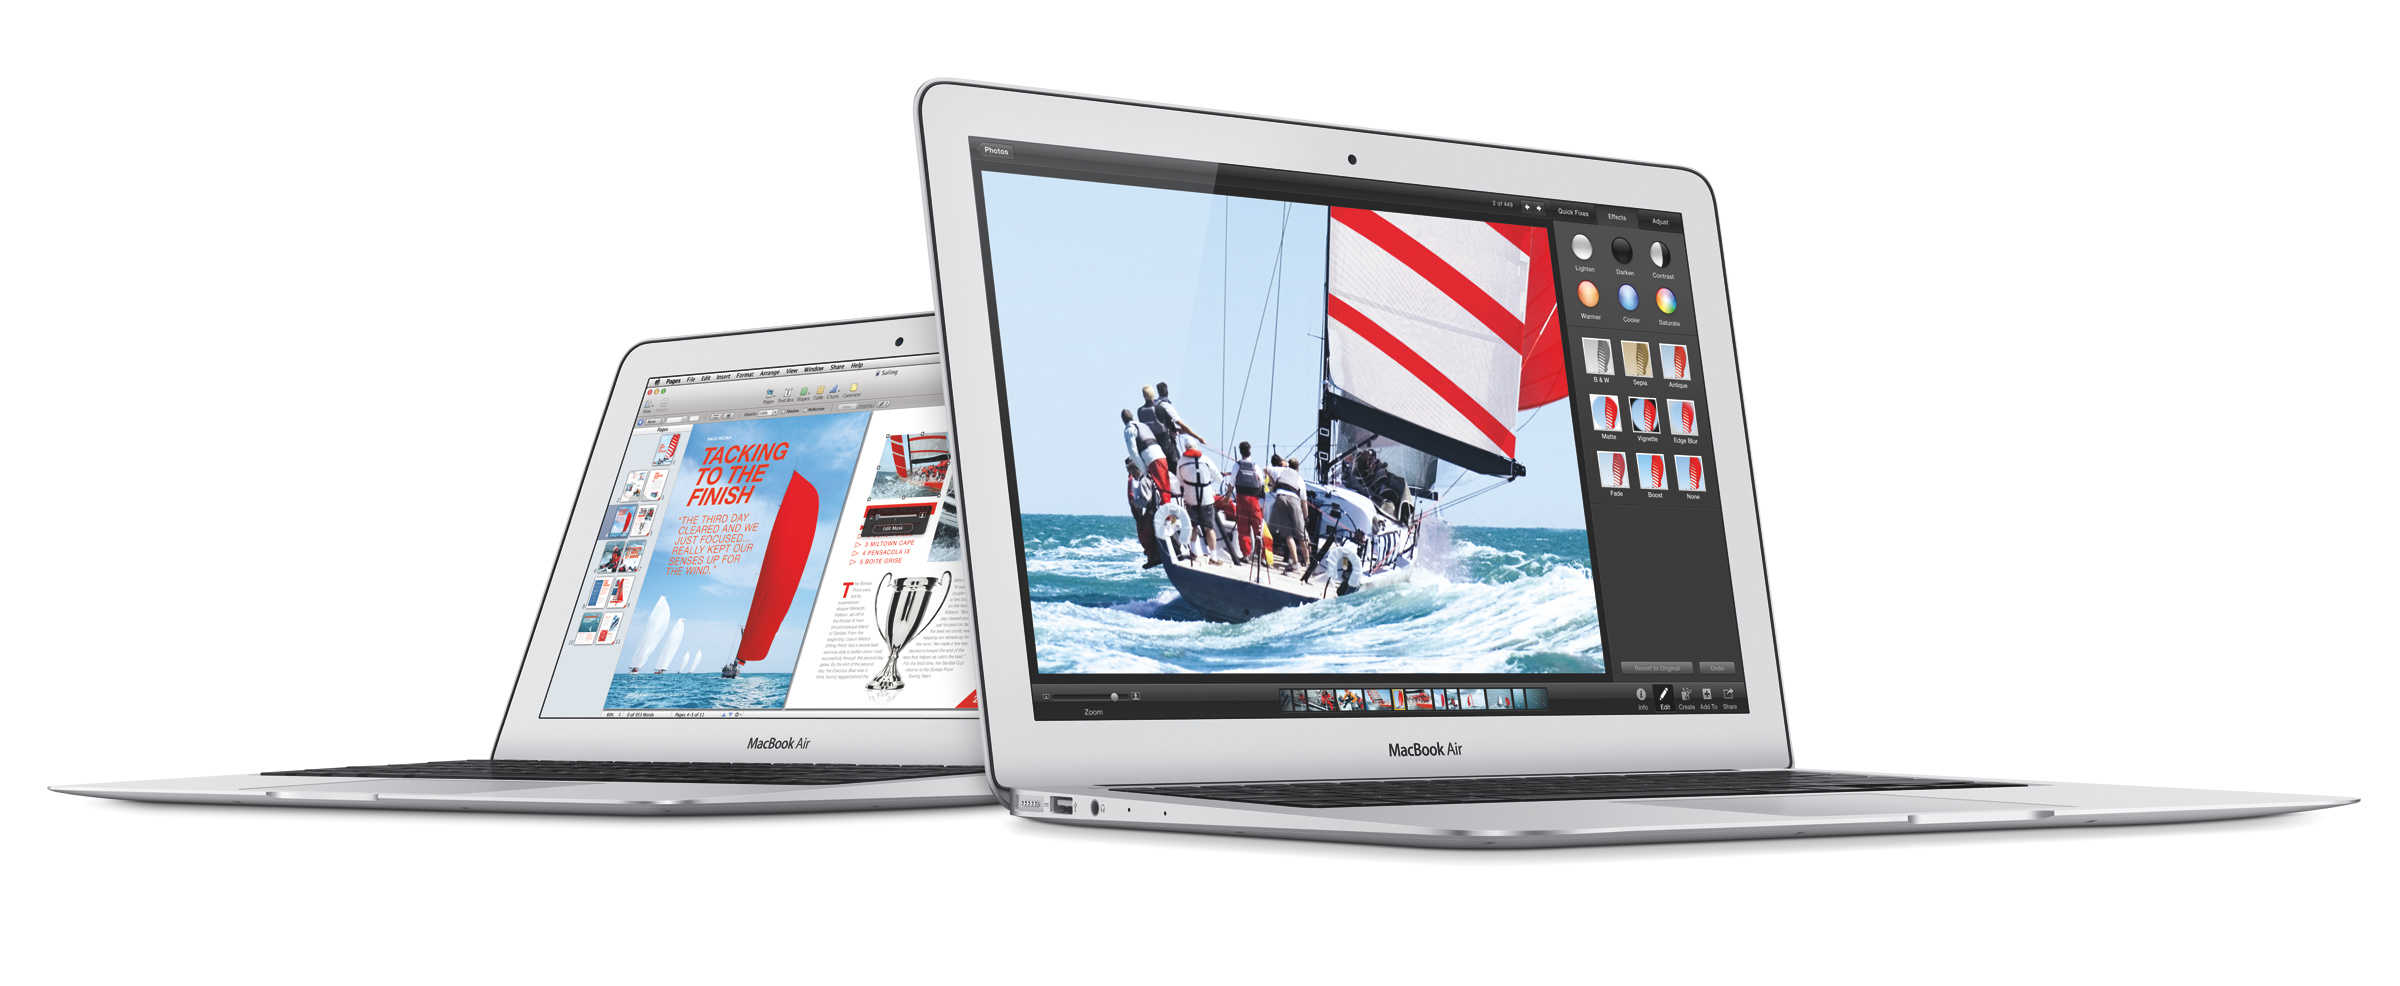 MacBook Air in 11-inch and 13-inch sizes.